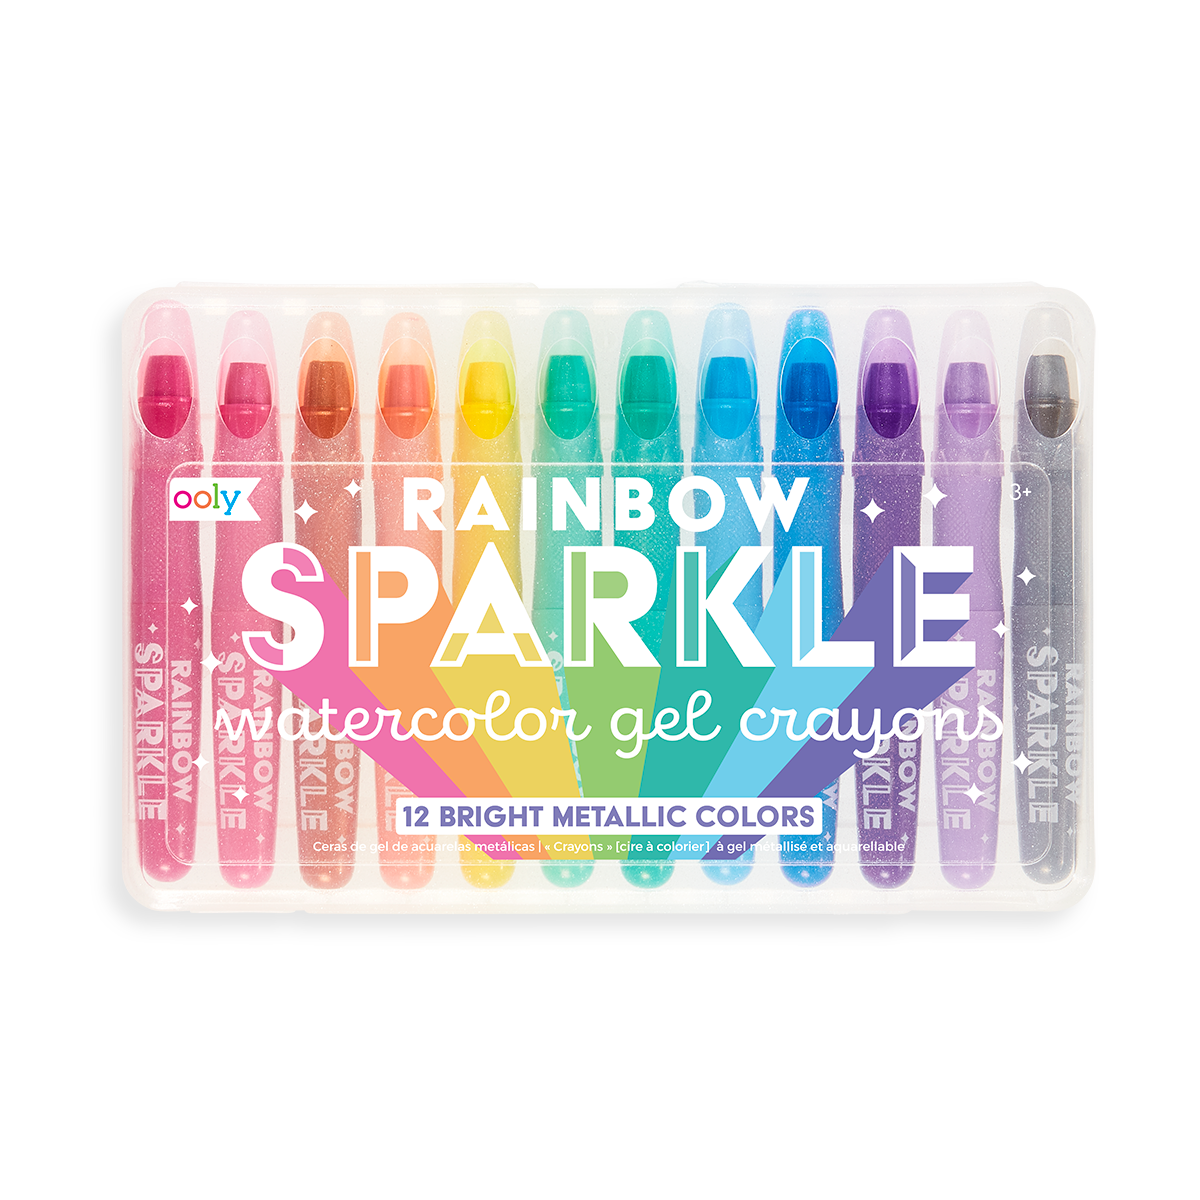 Glitter Crayons - Glitter Crayons updated their cover photo.